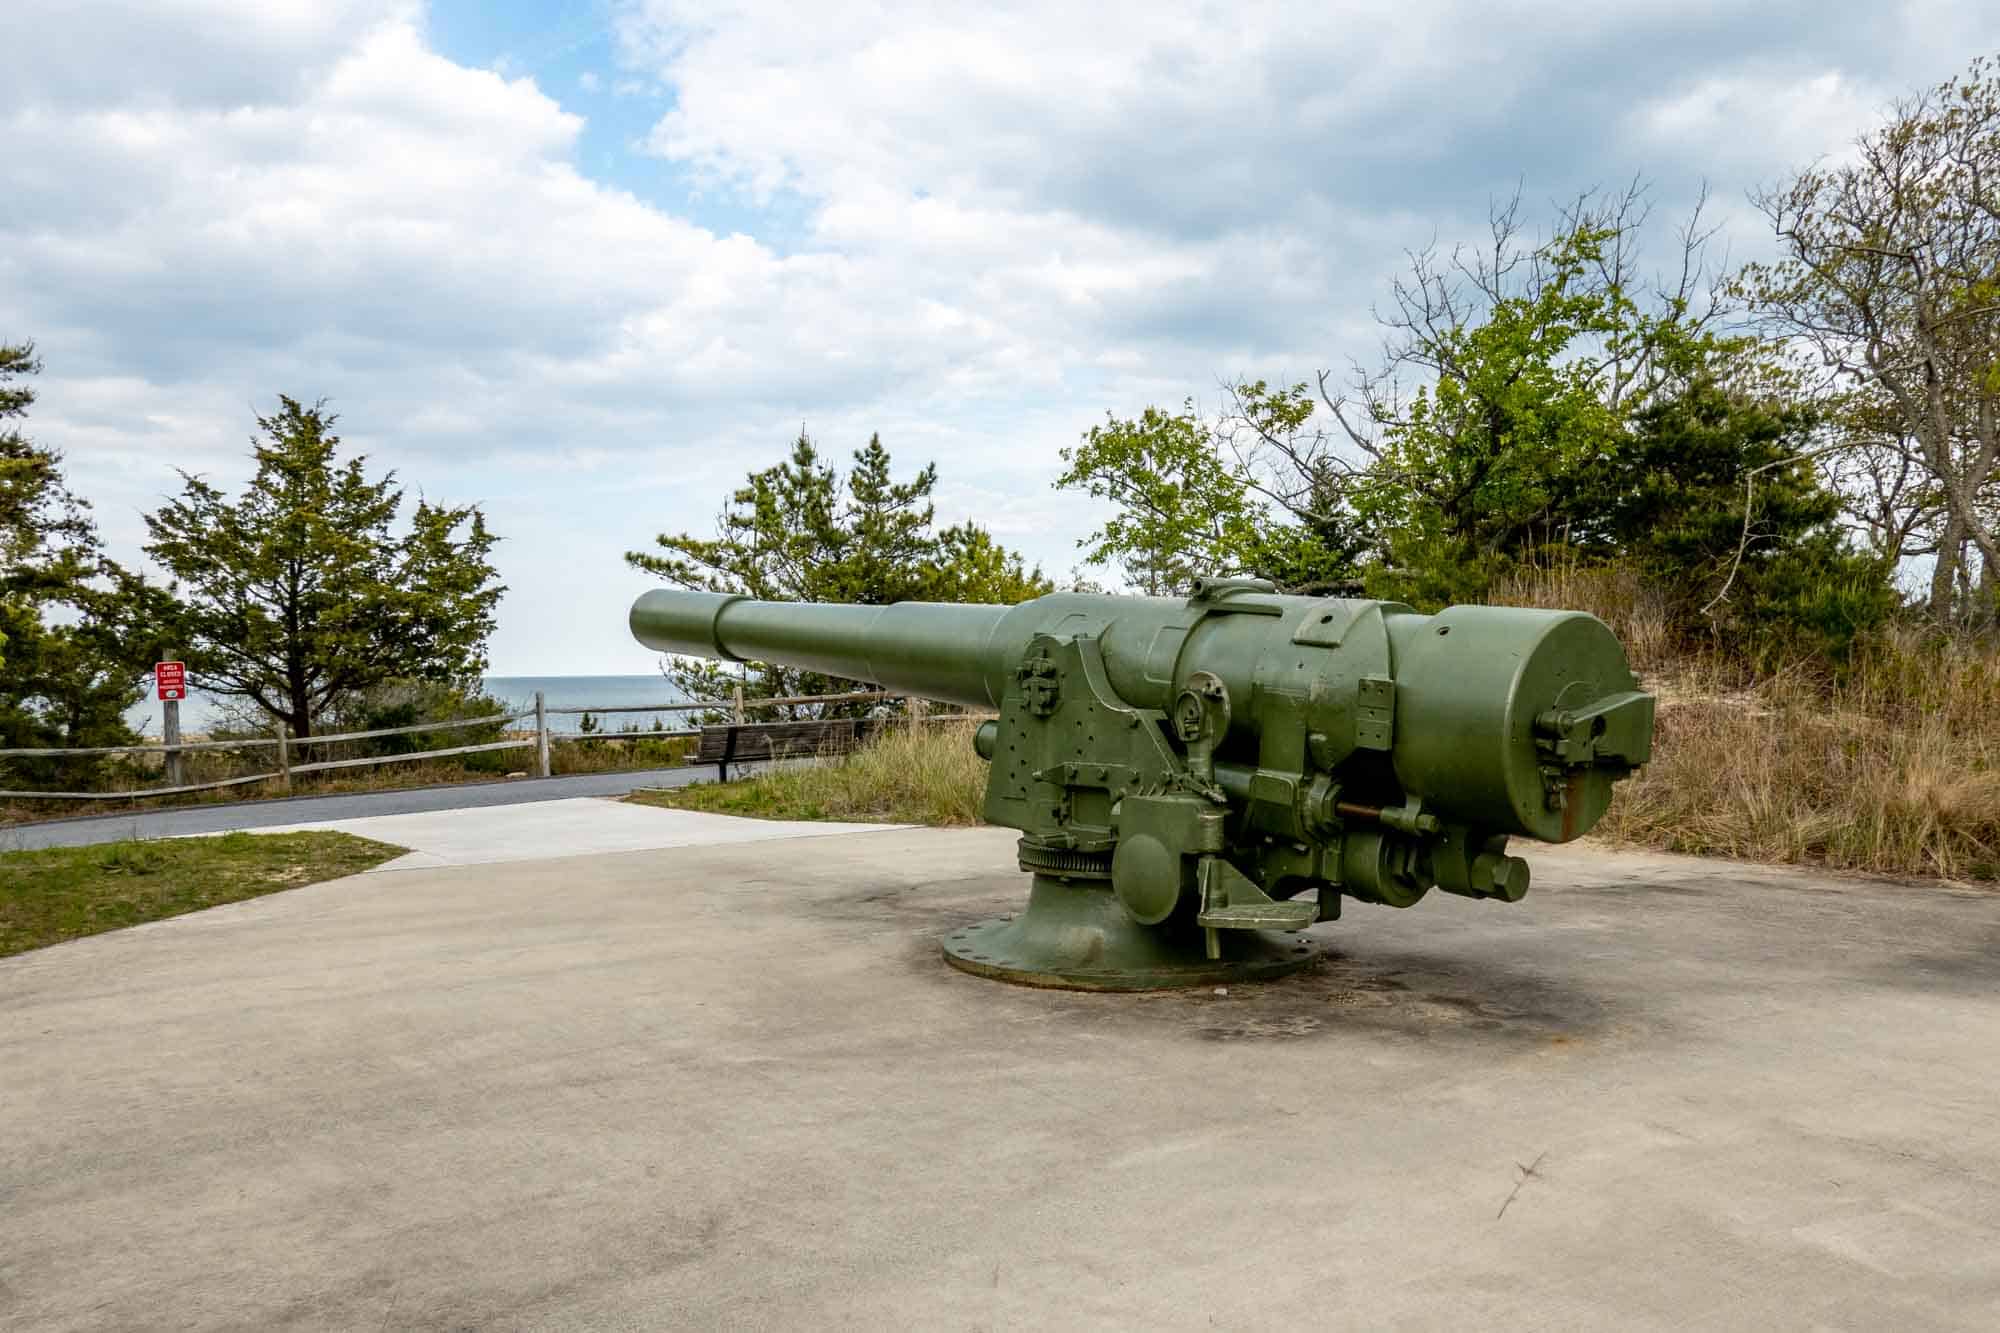 Artillery on display in an outdoor military park